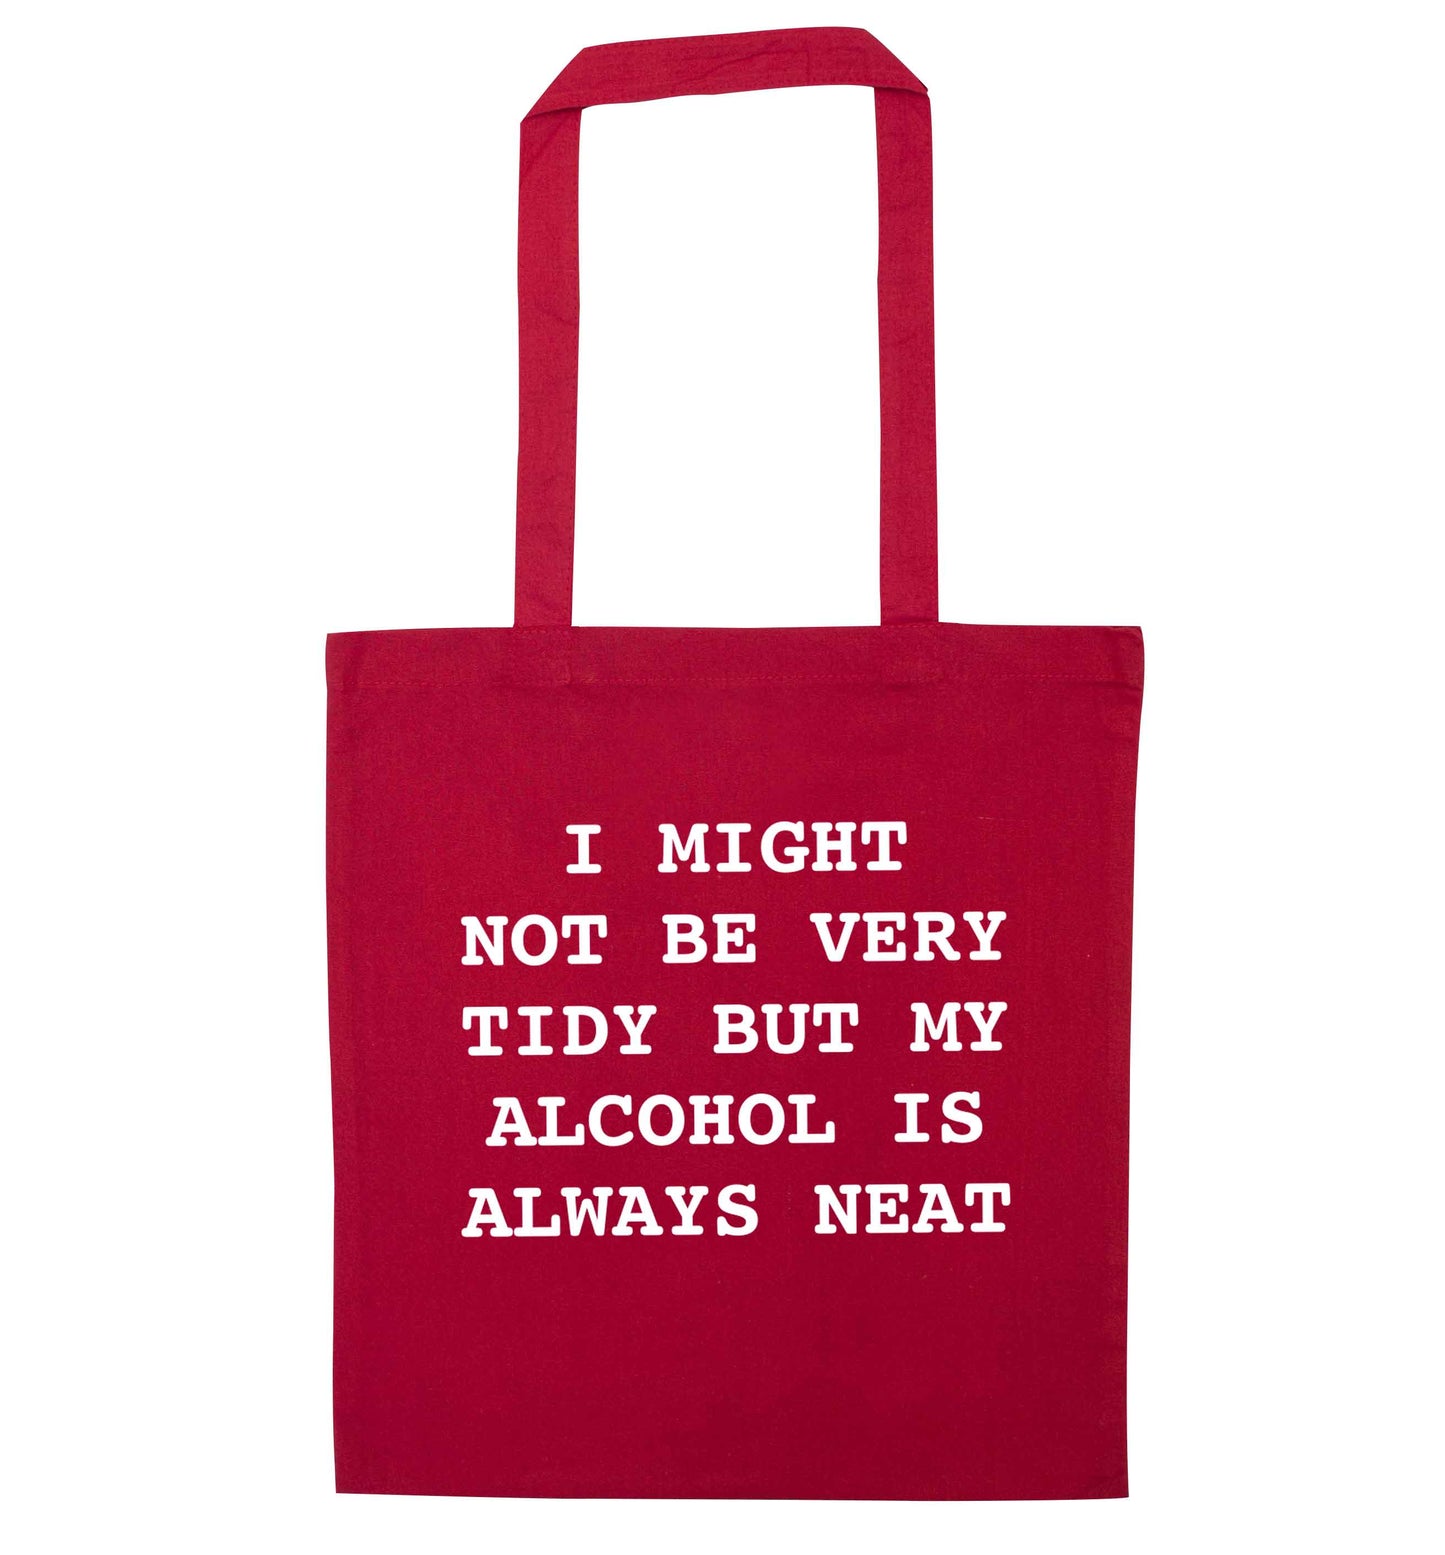 I might not be tidy but my alcohol is always neat red tote bag